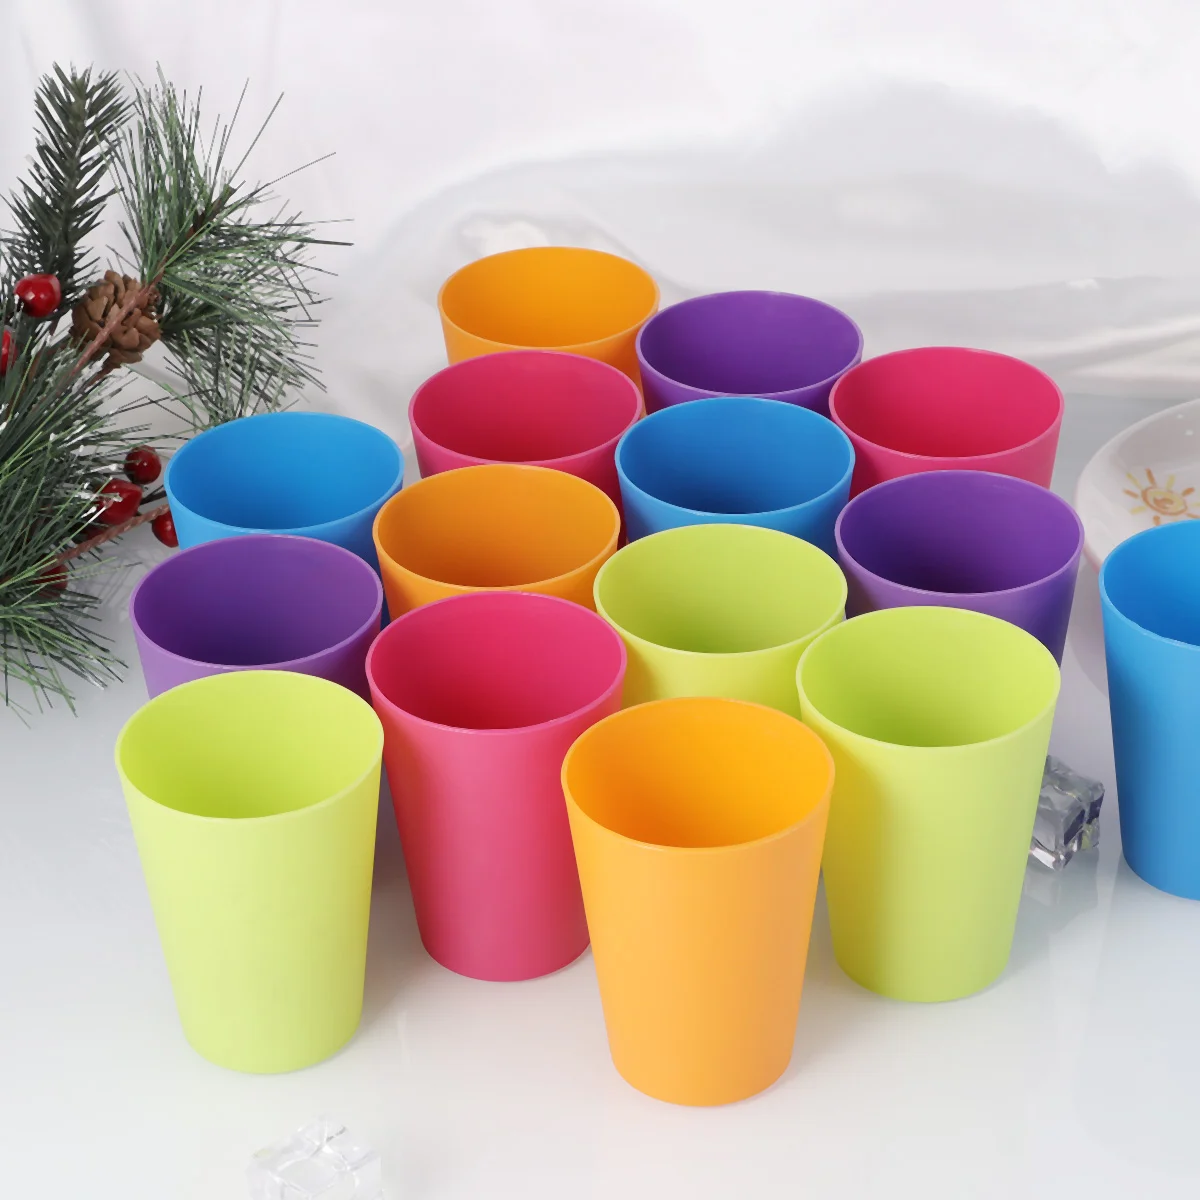 

Cups Plastic Reusable Unbreakable Tumblers Party Water Drinking Colorful Neon Cup Tea Tumbler Glasses Multi Shot Homemug